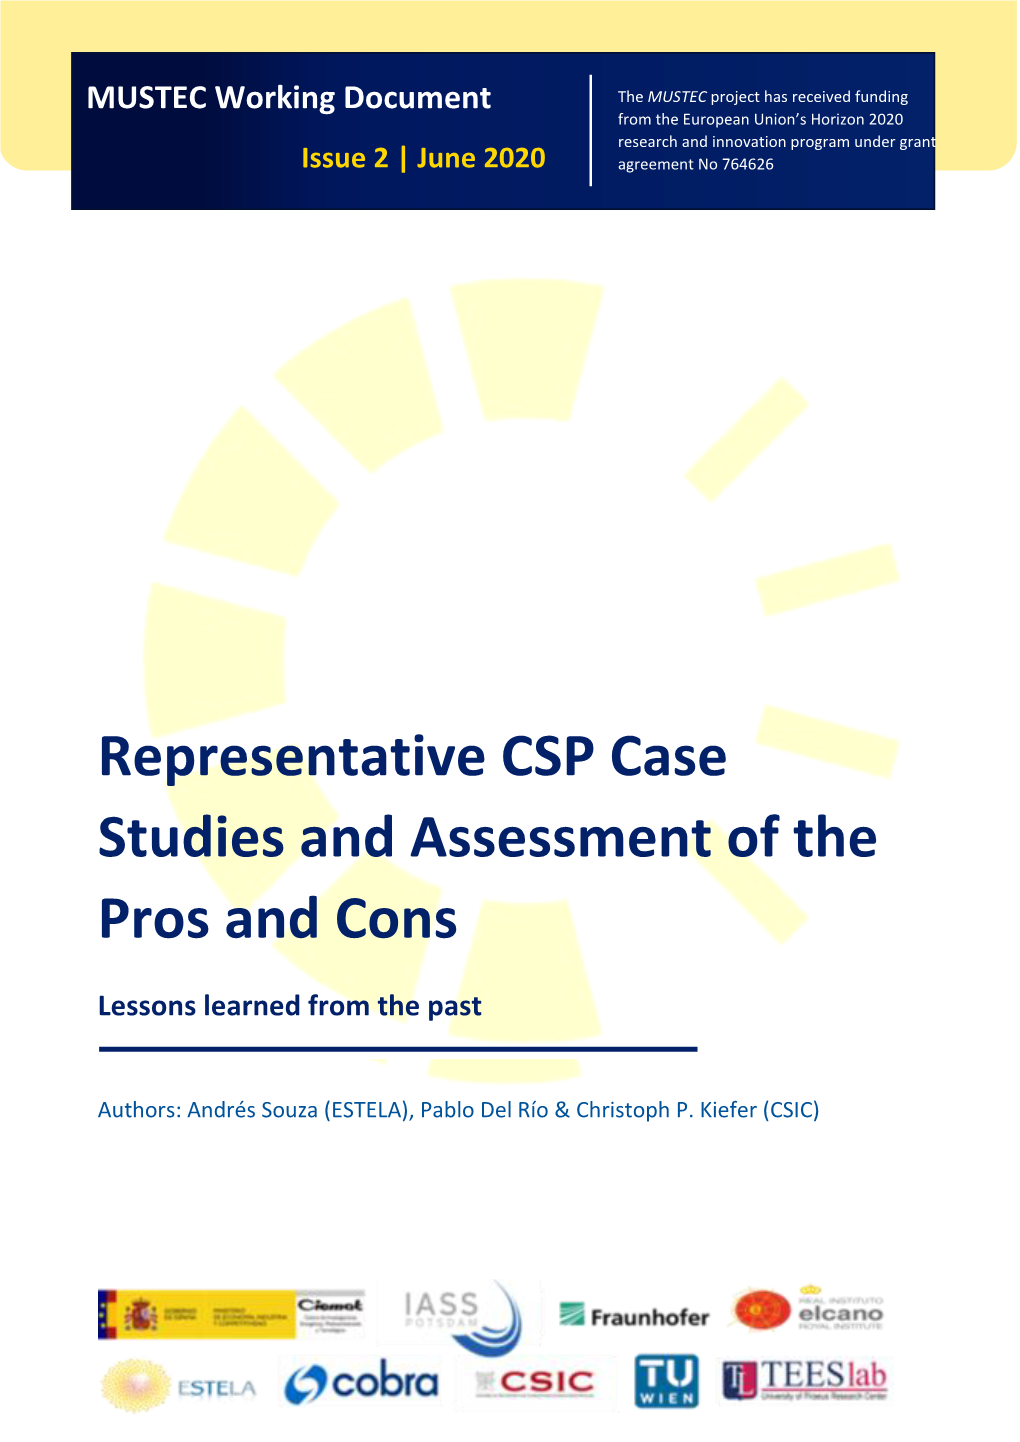 Representative CSP Case Studies and Assessment of the Pros and Cons